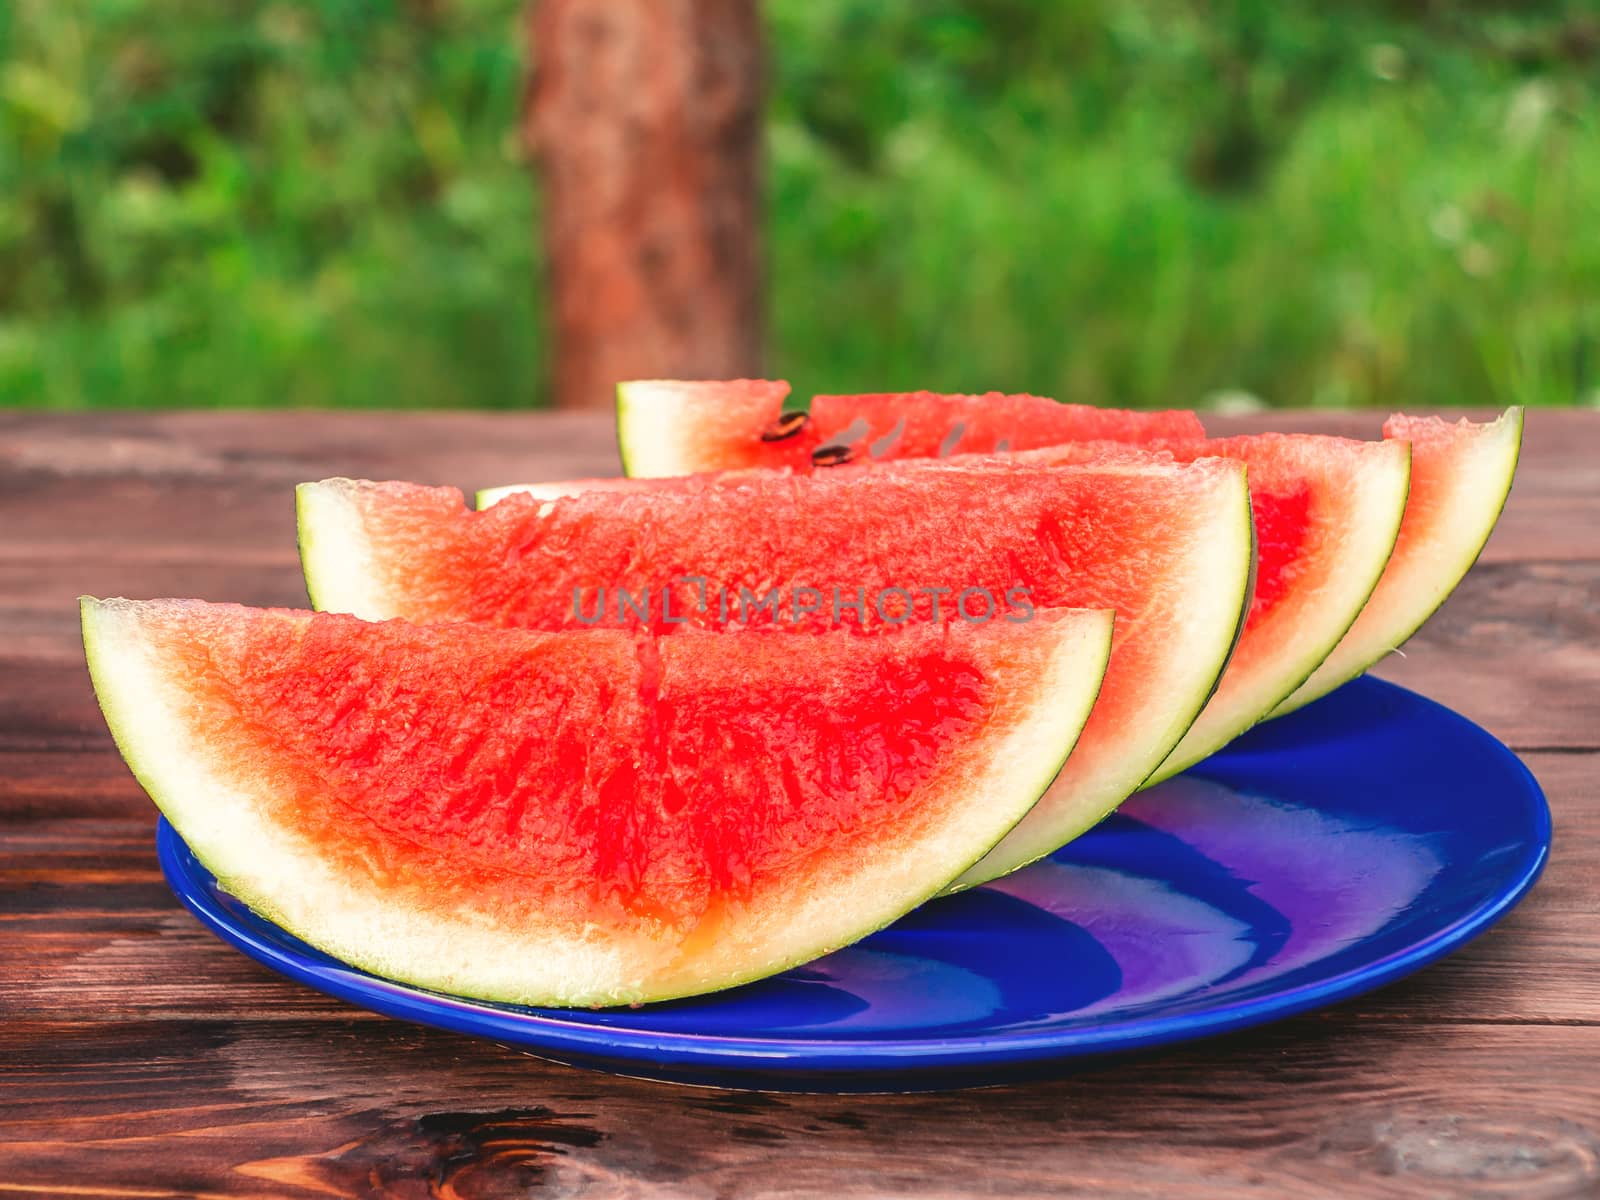 Sliced ripe red watermelon on a blue plate on a wooden table.